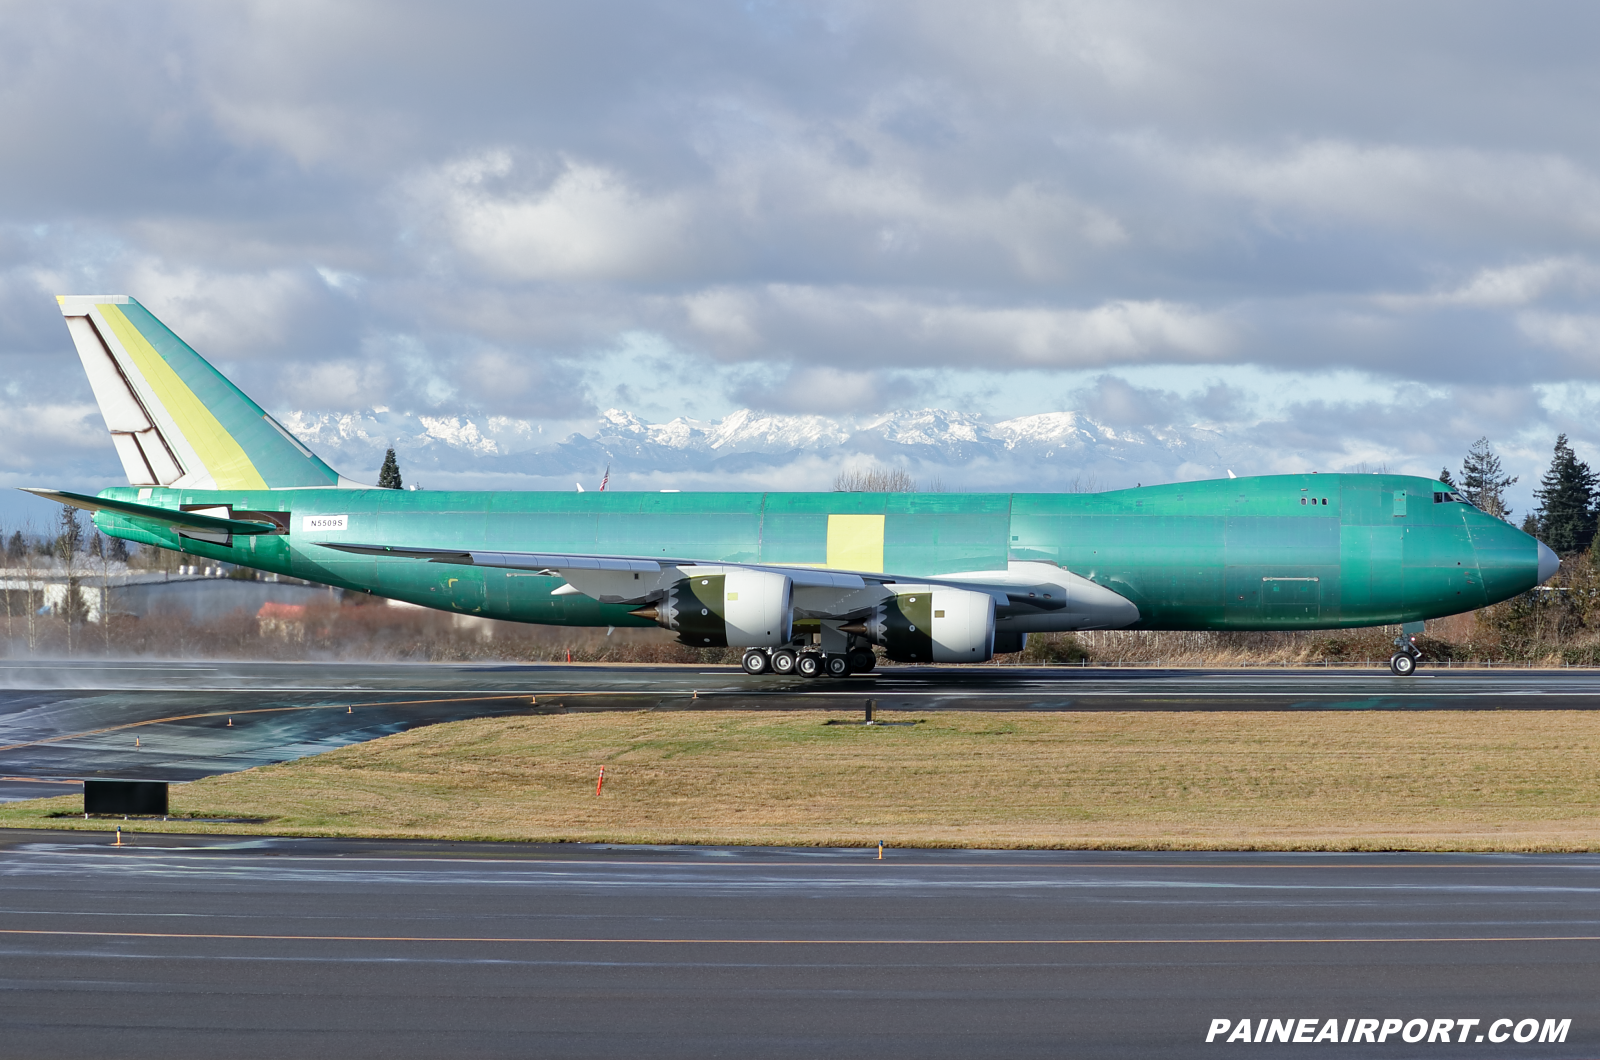 UPS 747-8F at KPAE Paine Field